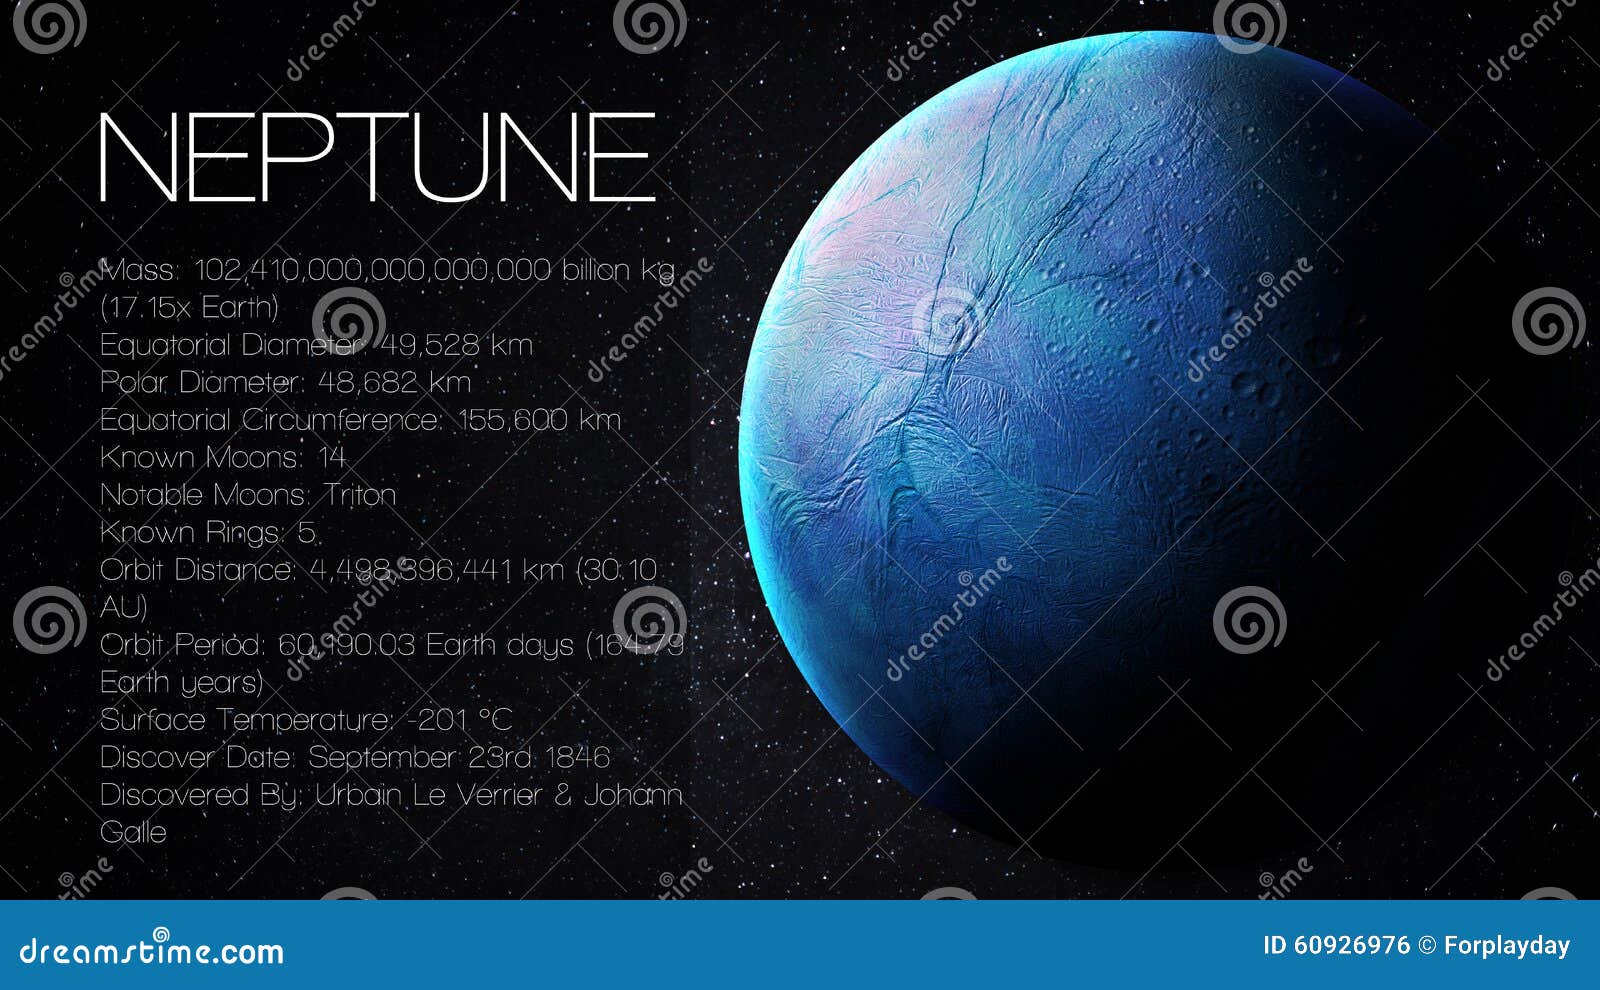 neptune high resolution infographic presents one k solar system planet look facts image elements furnished nasa 60926976